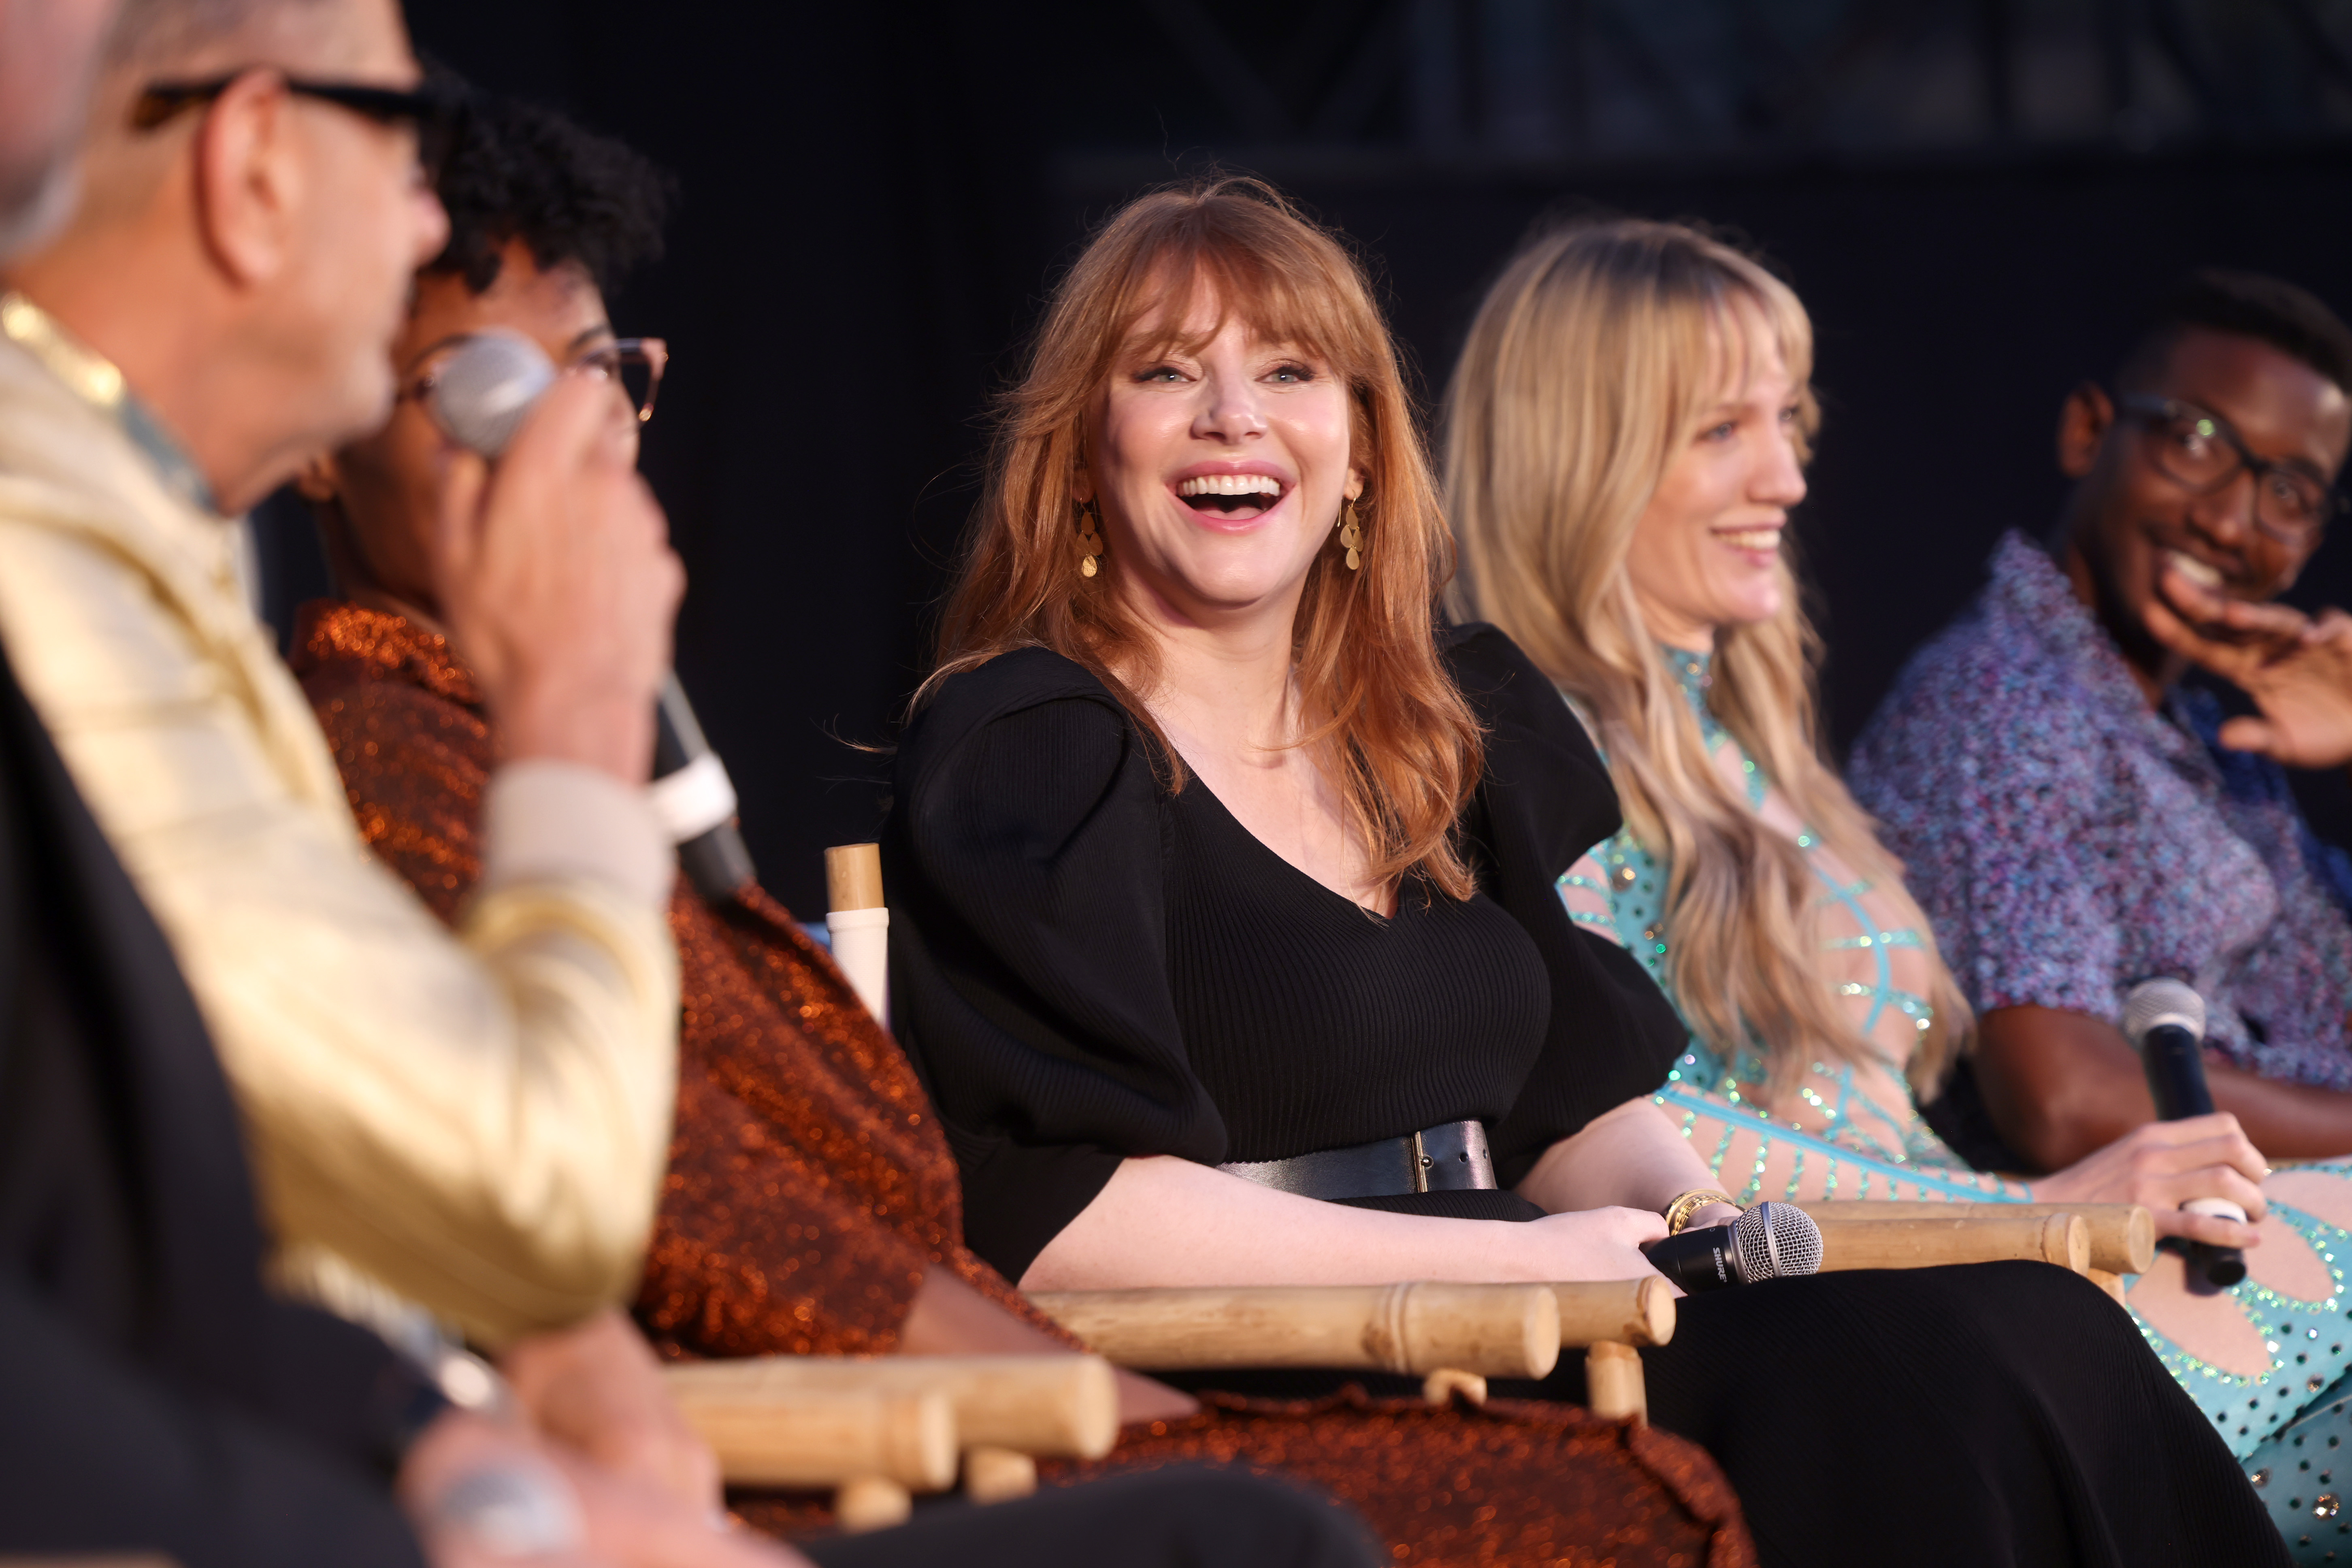 Jeff Goldblum, DeWanda Wise, Bryce Dallas Howard, Emily Carmichael, and Mamoudou Athie speak onstage during Charlize Theron's Africa Outreach Project (CTAOP) Block Party at Universal Studios Backlot on June 11, 2022 in Universal City, California | Source: Getty Images